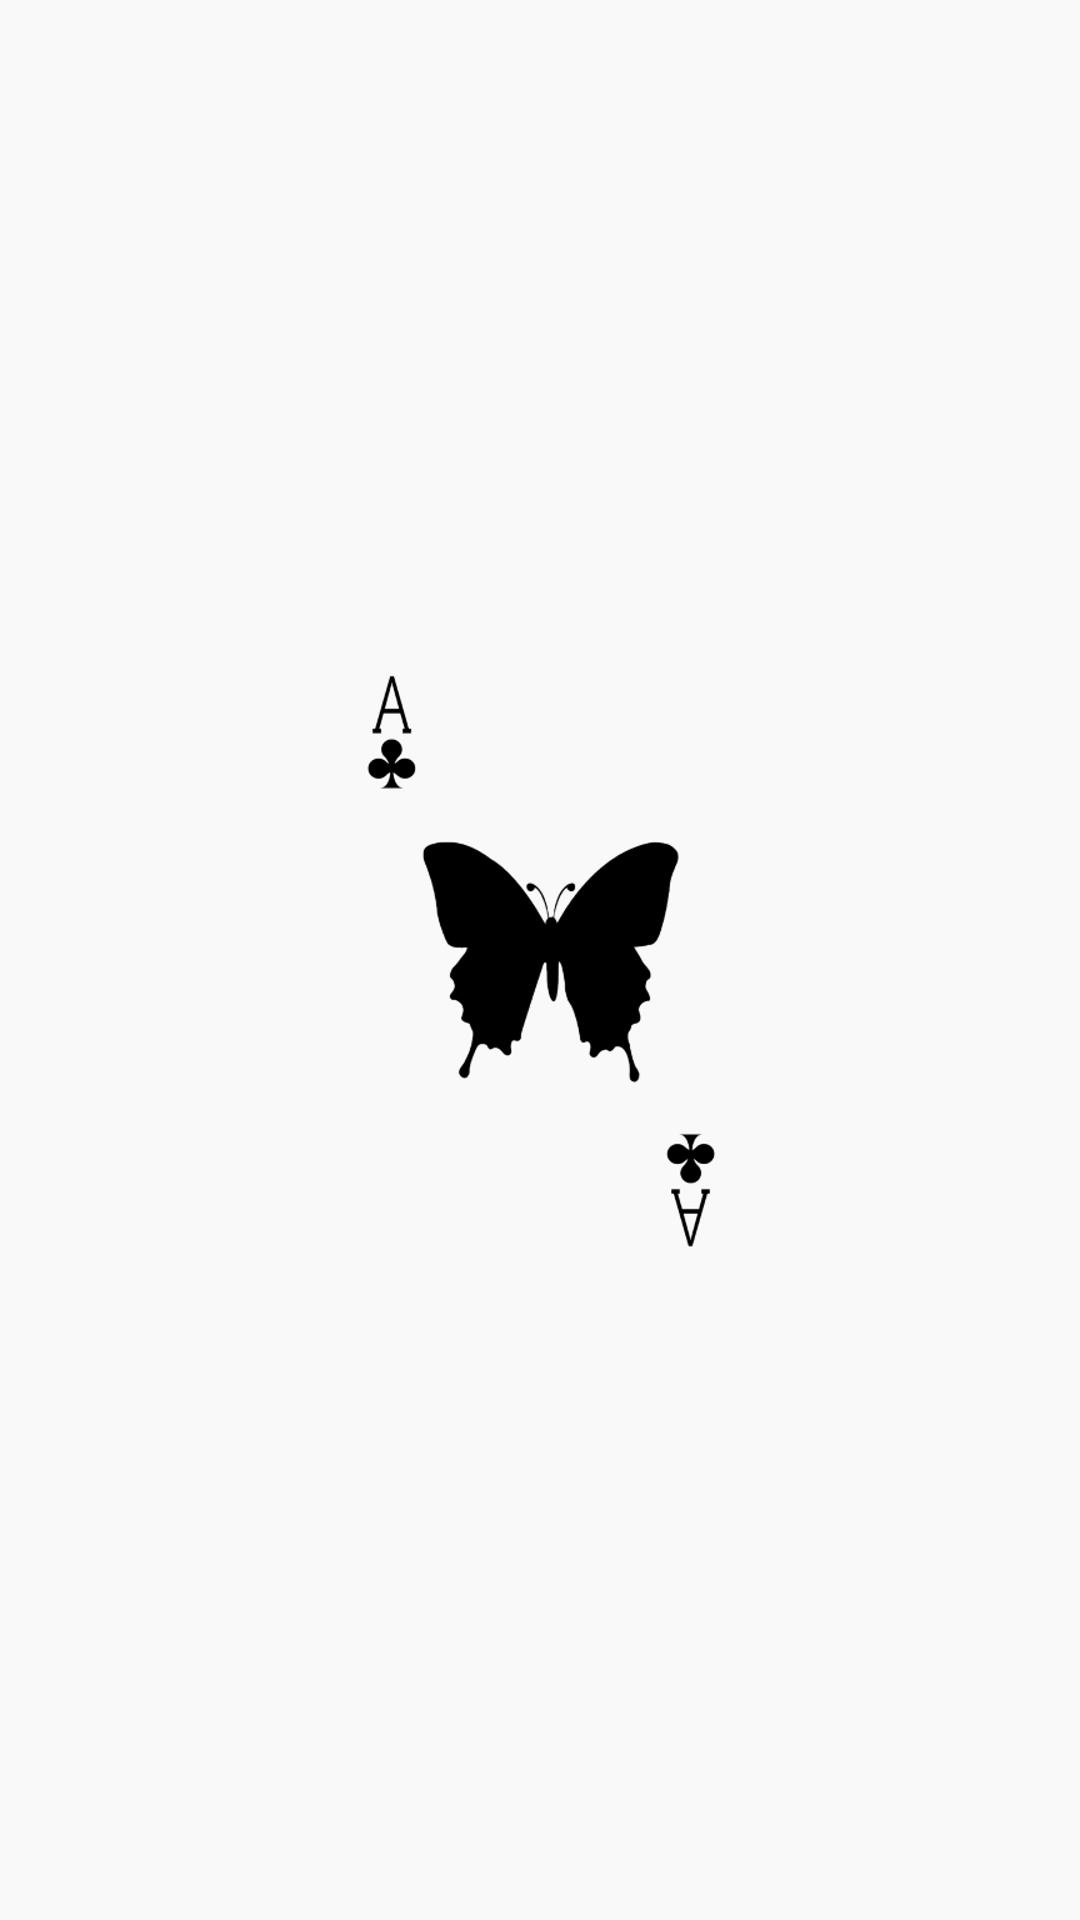 A butterfly with an ace of spades - White